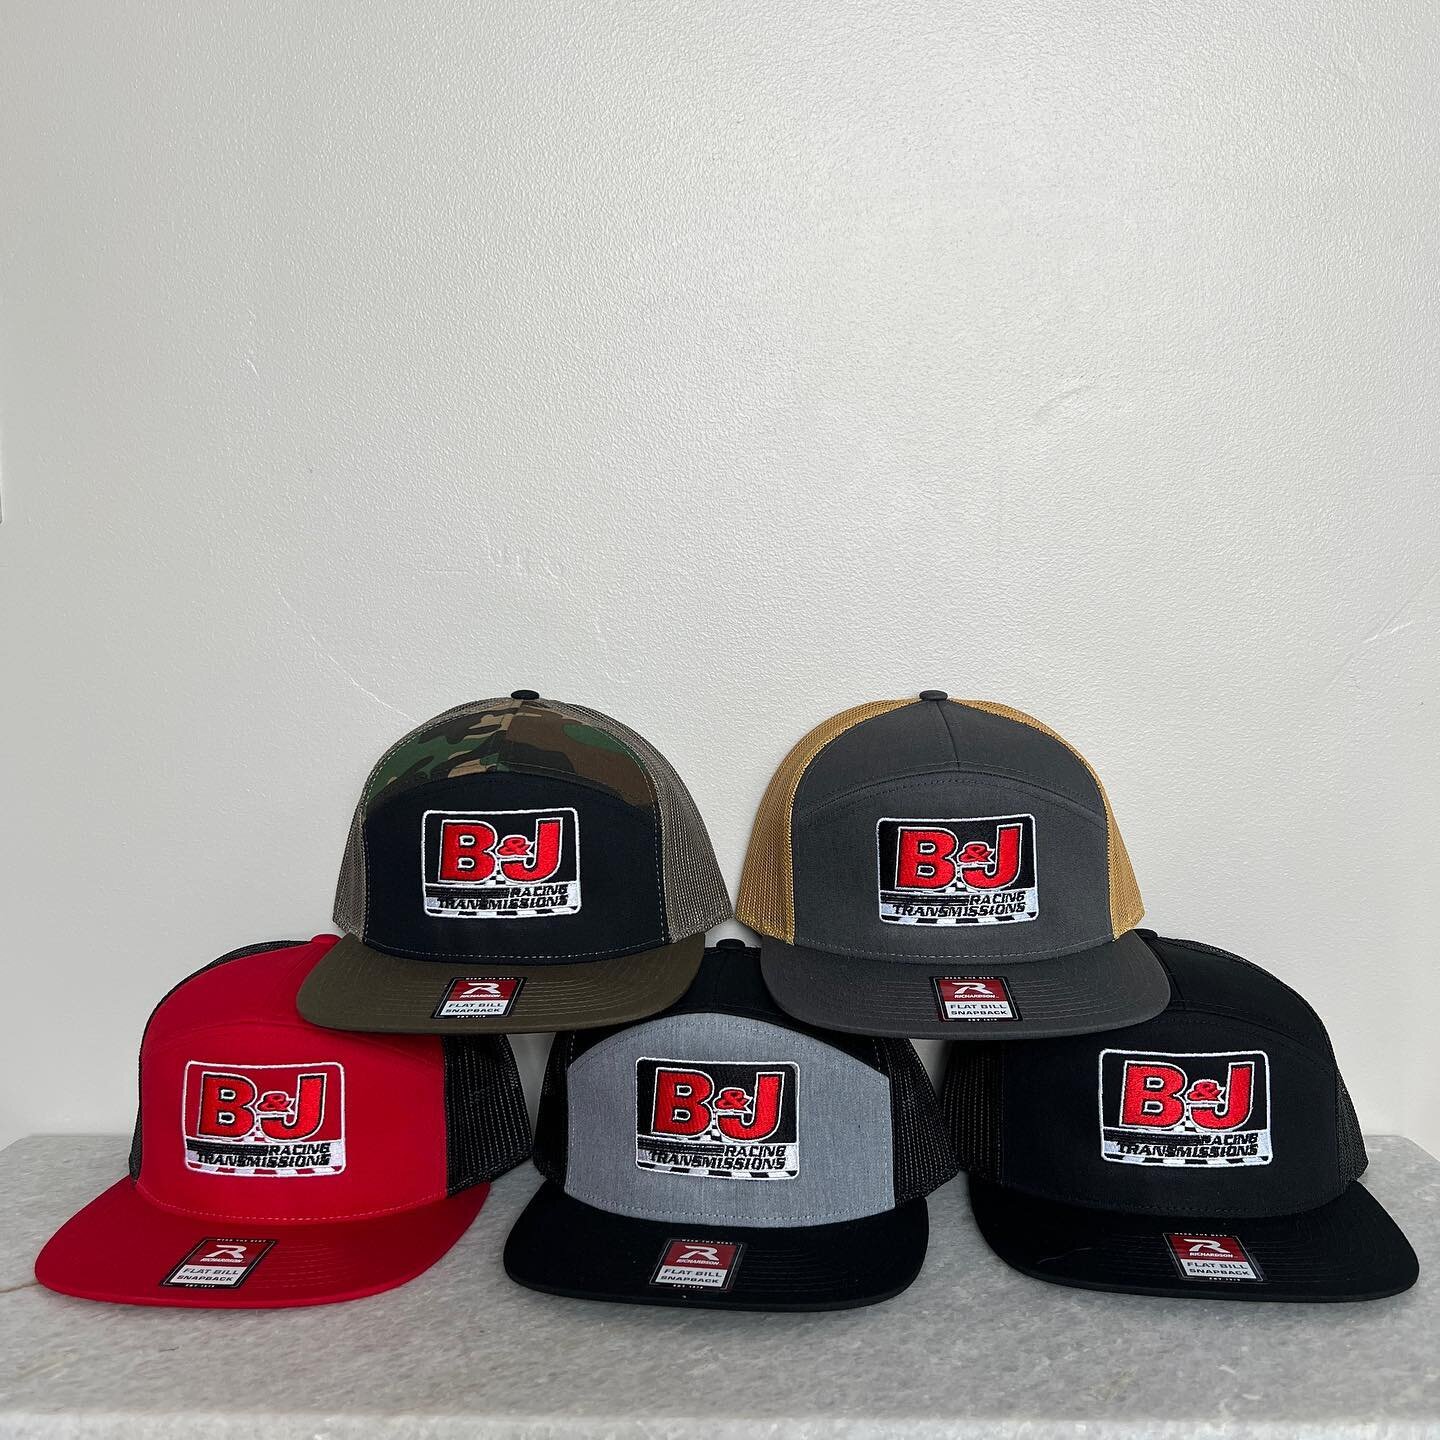 New hats available on the website! Limited quantity as we are wanting to see the interest they bring.